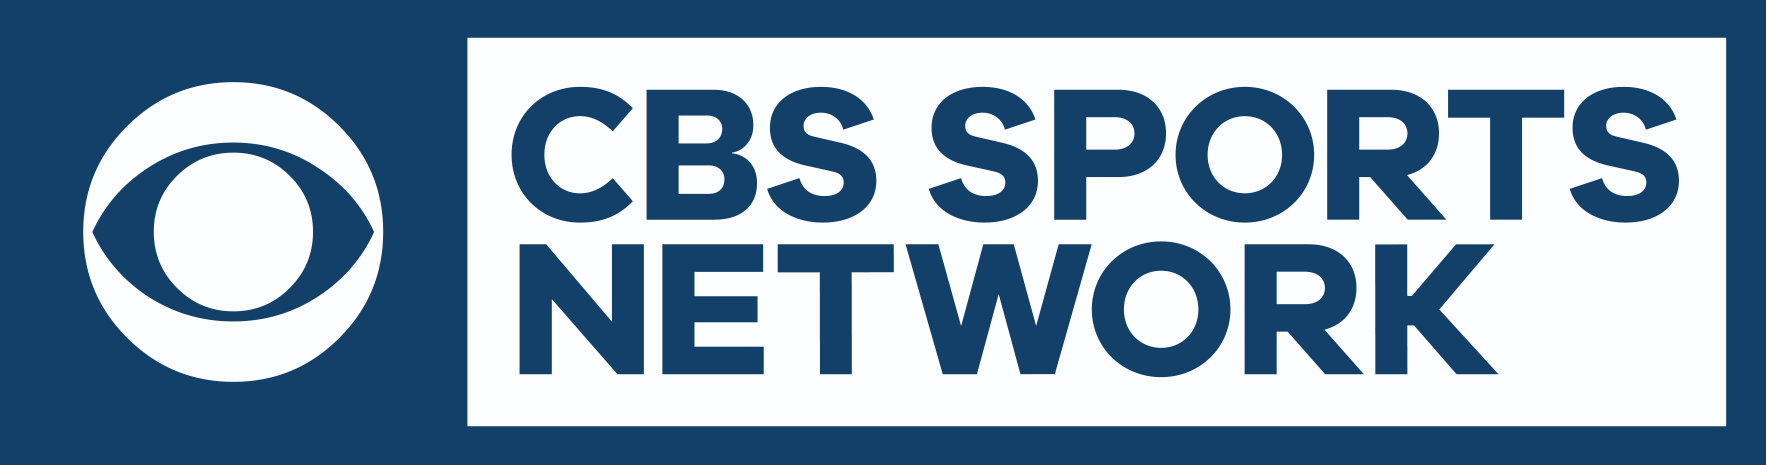 Paramount Press Express CBS SPORTS NETWORK PUTS ON FULL COURT PRESS THROUGHOUT MARCH WITH LIVE STUDIO COVERAGE, EXCLUSIVE ENCORE PRESENTATIONS OF TOP NCAA TOURNAMENT GAMES AND ON-SITE FINAL FOUR PROGRAMMING